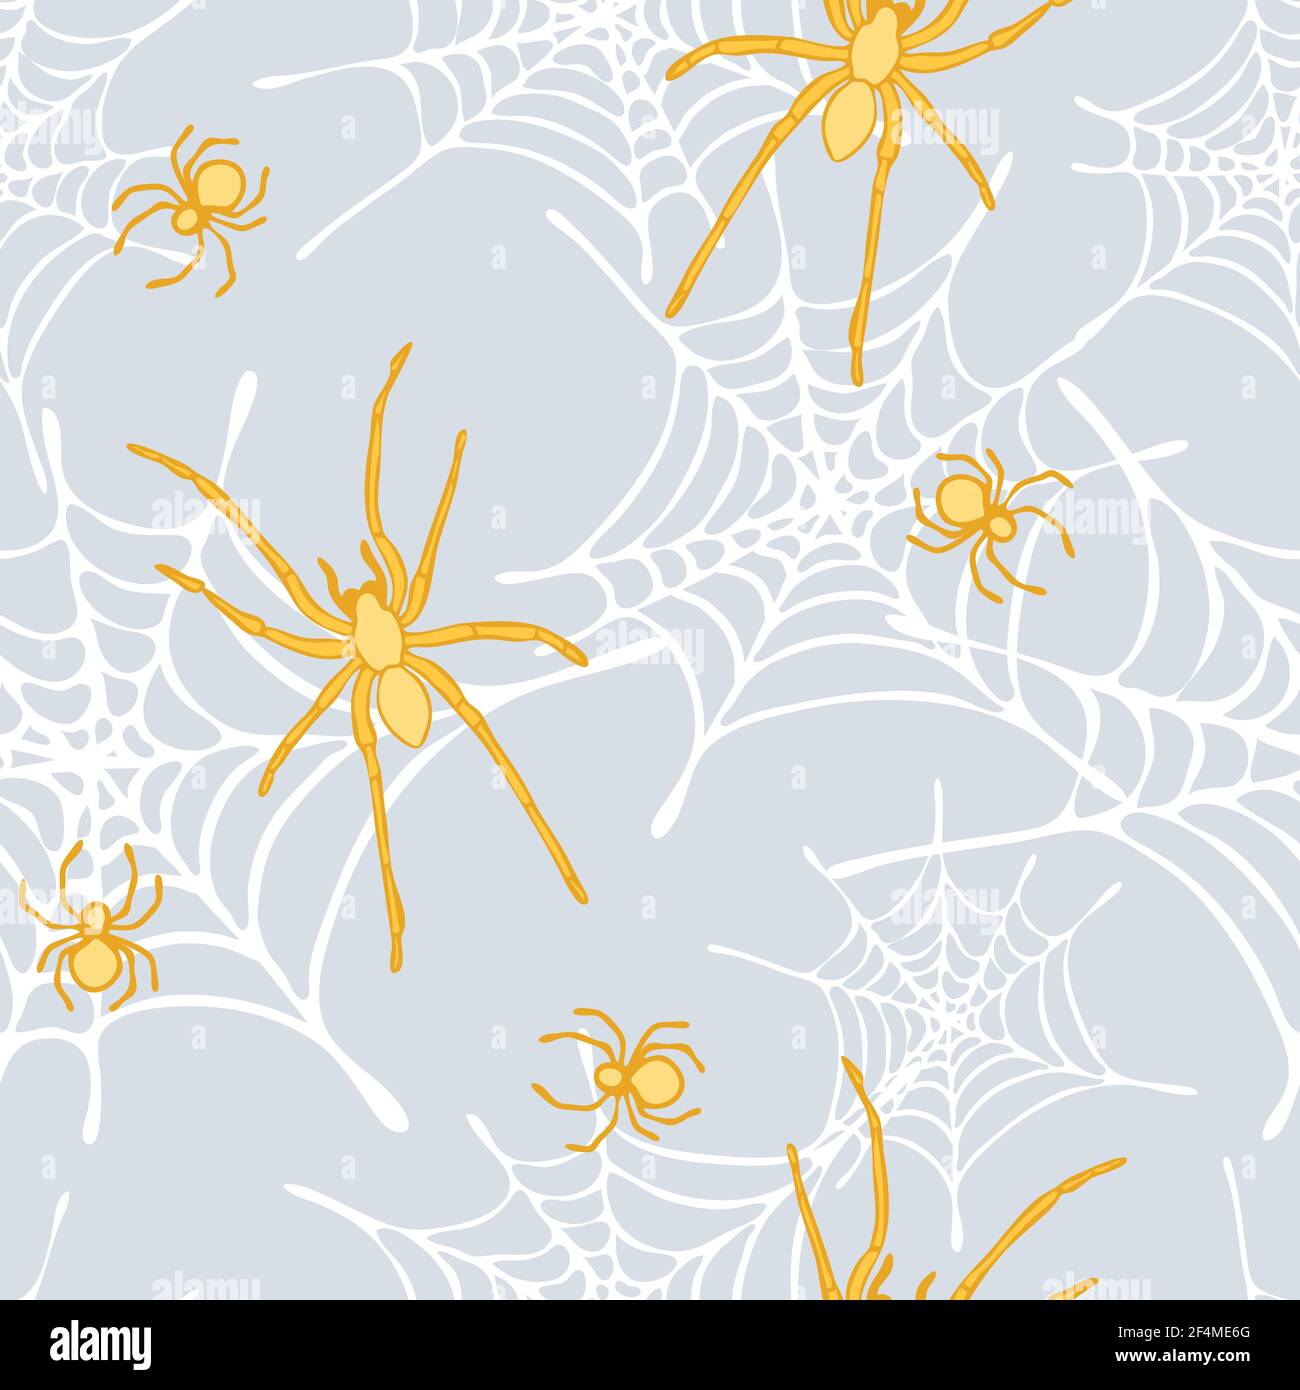 Seamless vector pattern with yellow spiders and spiderweb on light blue background. Animal wallpaper design. Stock Vector